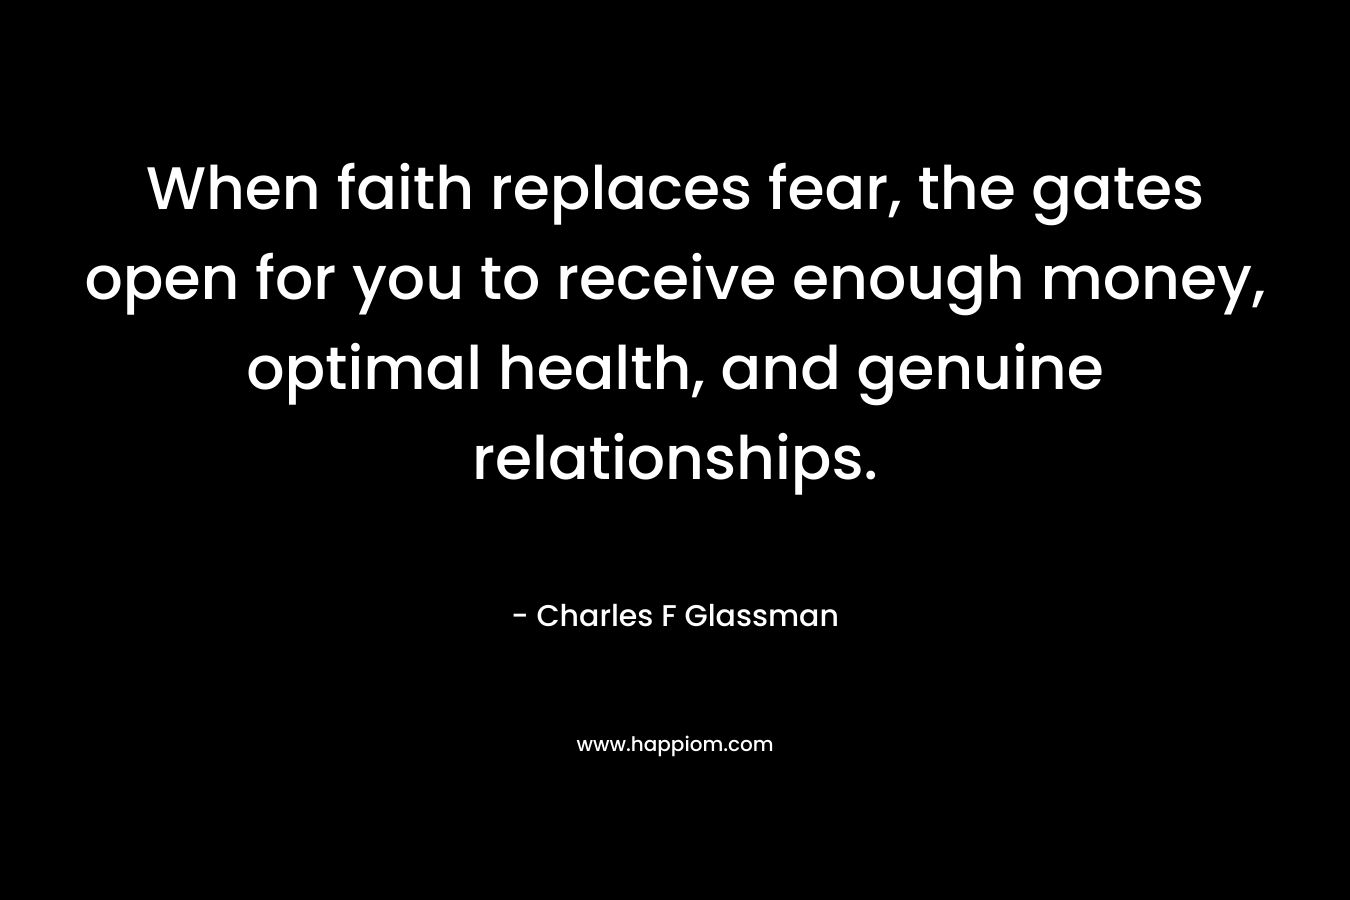 When faith replaces fear, the gates open for you to receive enough money, optimal health, and genuine relationships. – Charles F Glassman